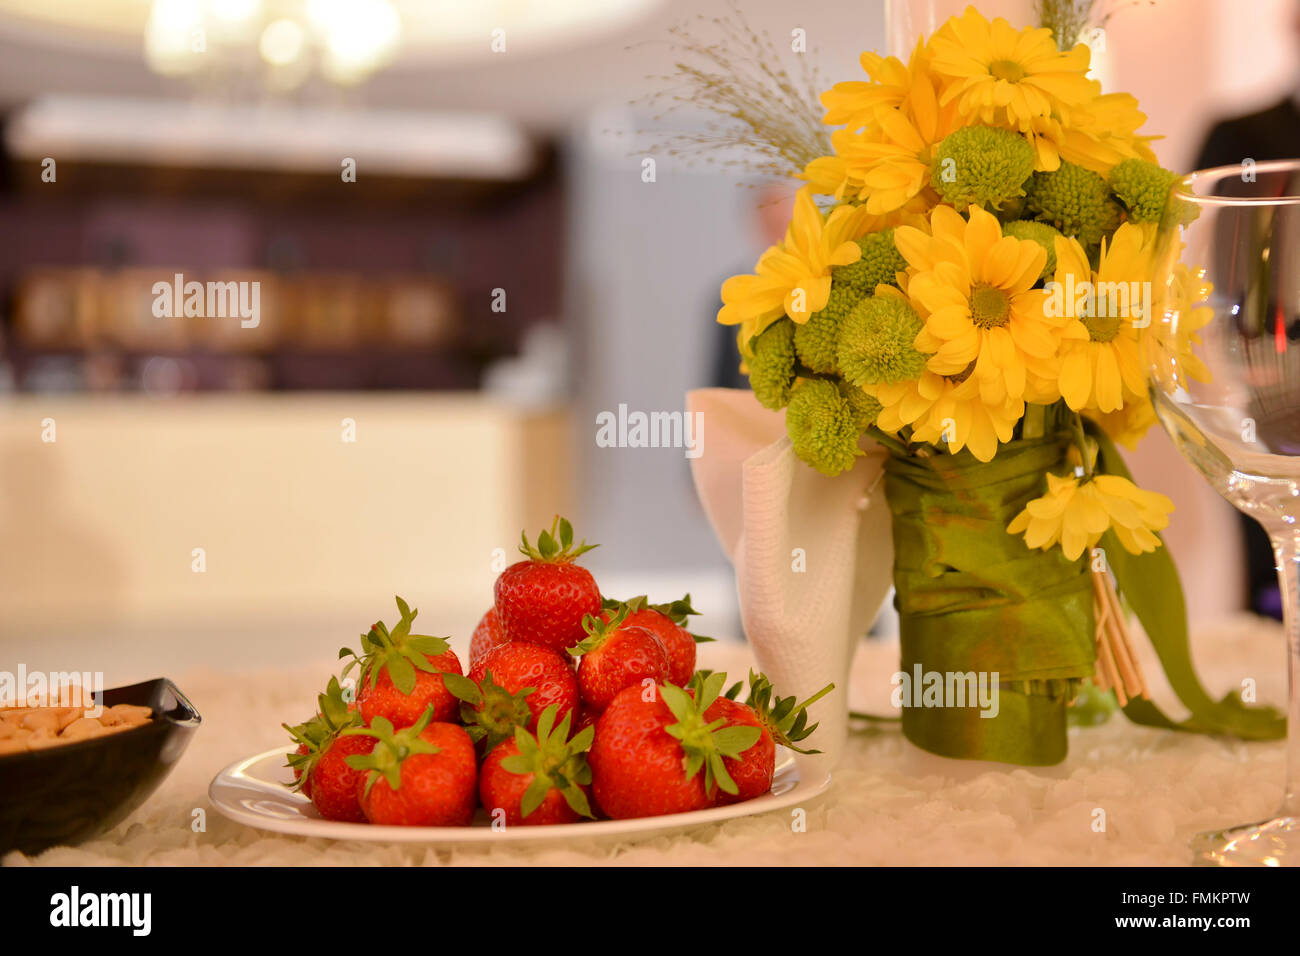 Strawberries placed in a white plate Stock Photo